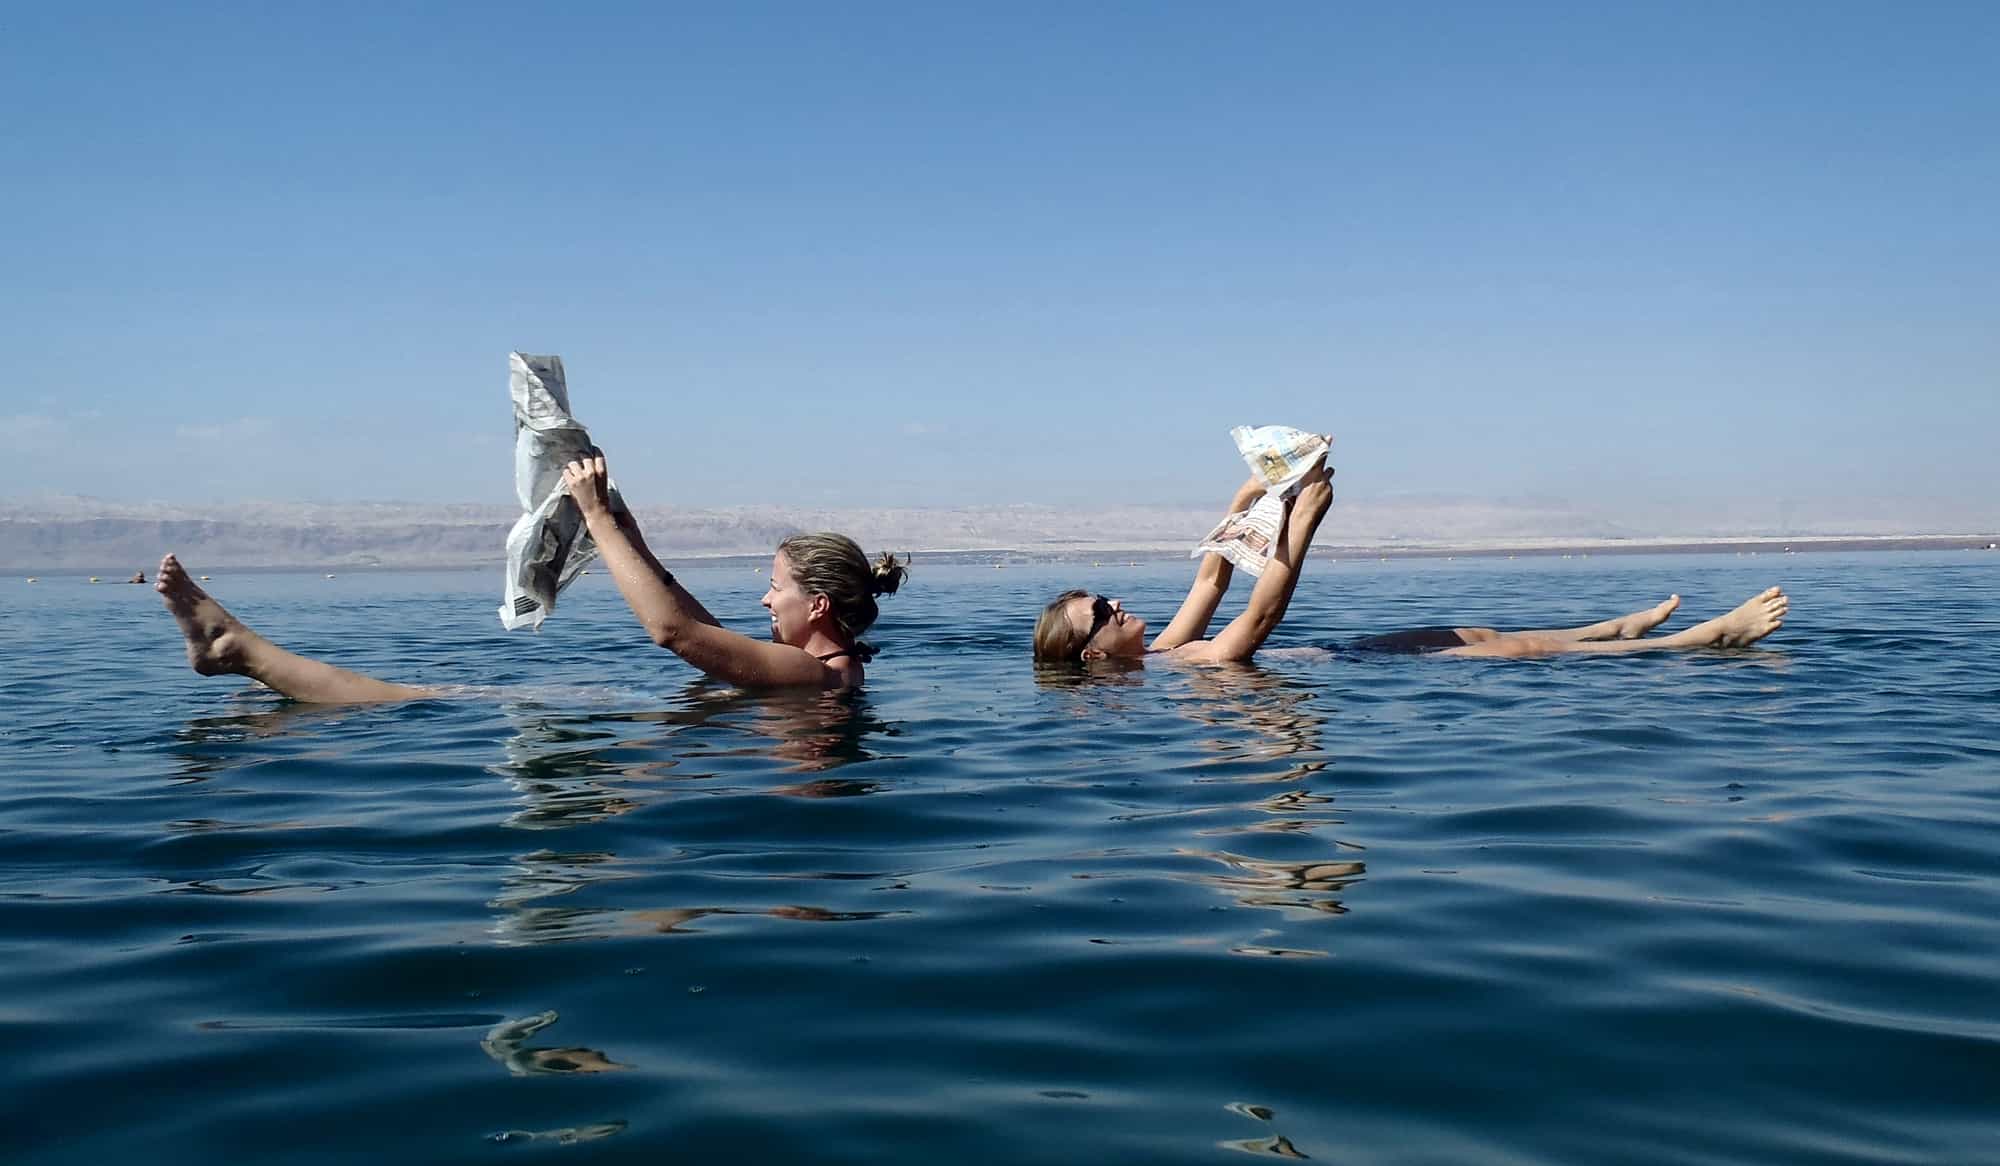 10 Fun Facts About the Dead Sea - Plus Even More Interesting Facts